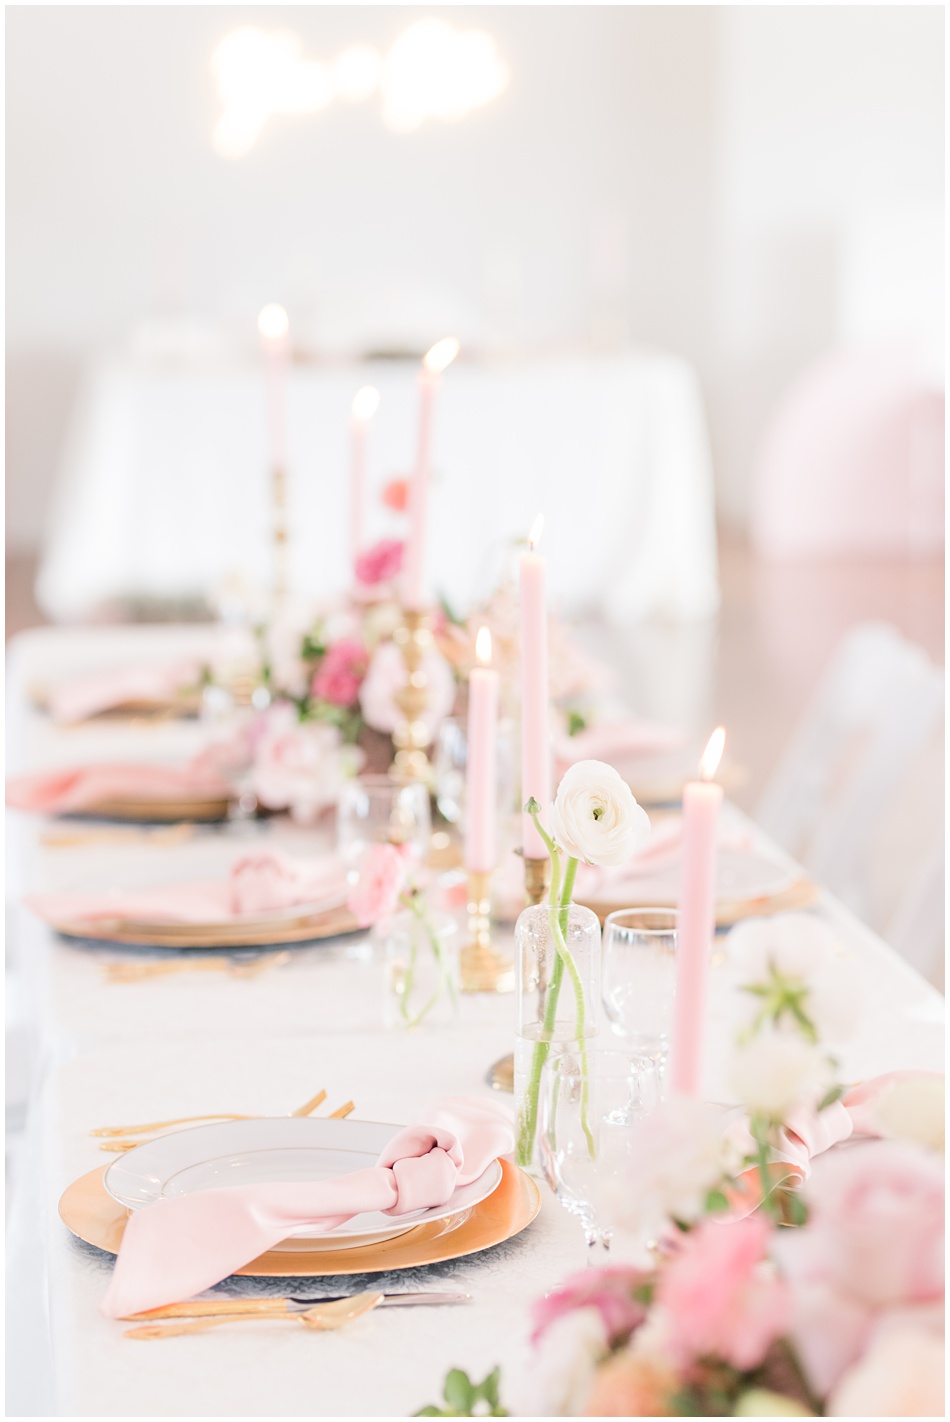 Valentine's Day Wedding Inspiration in Muted Color Palette 